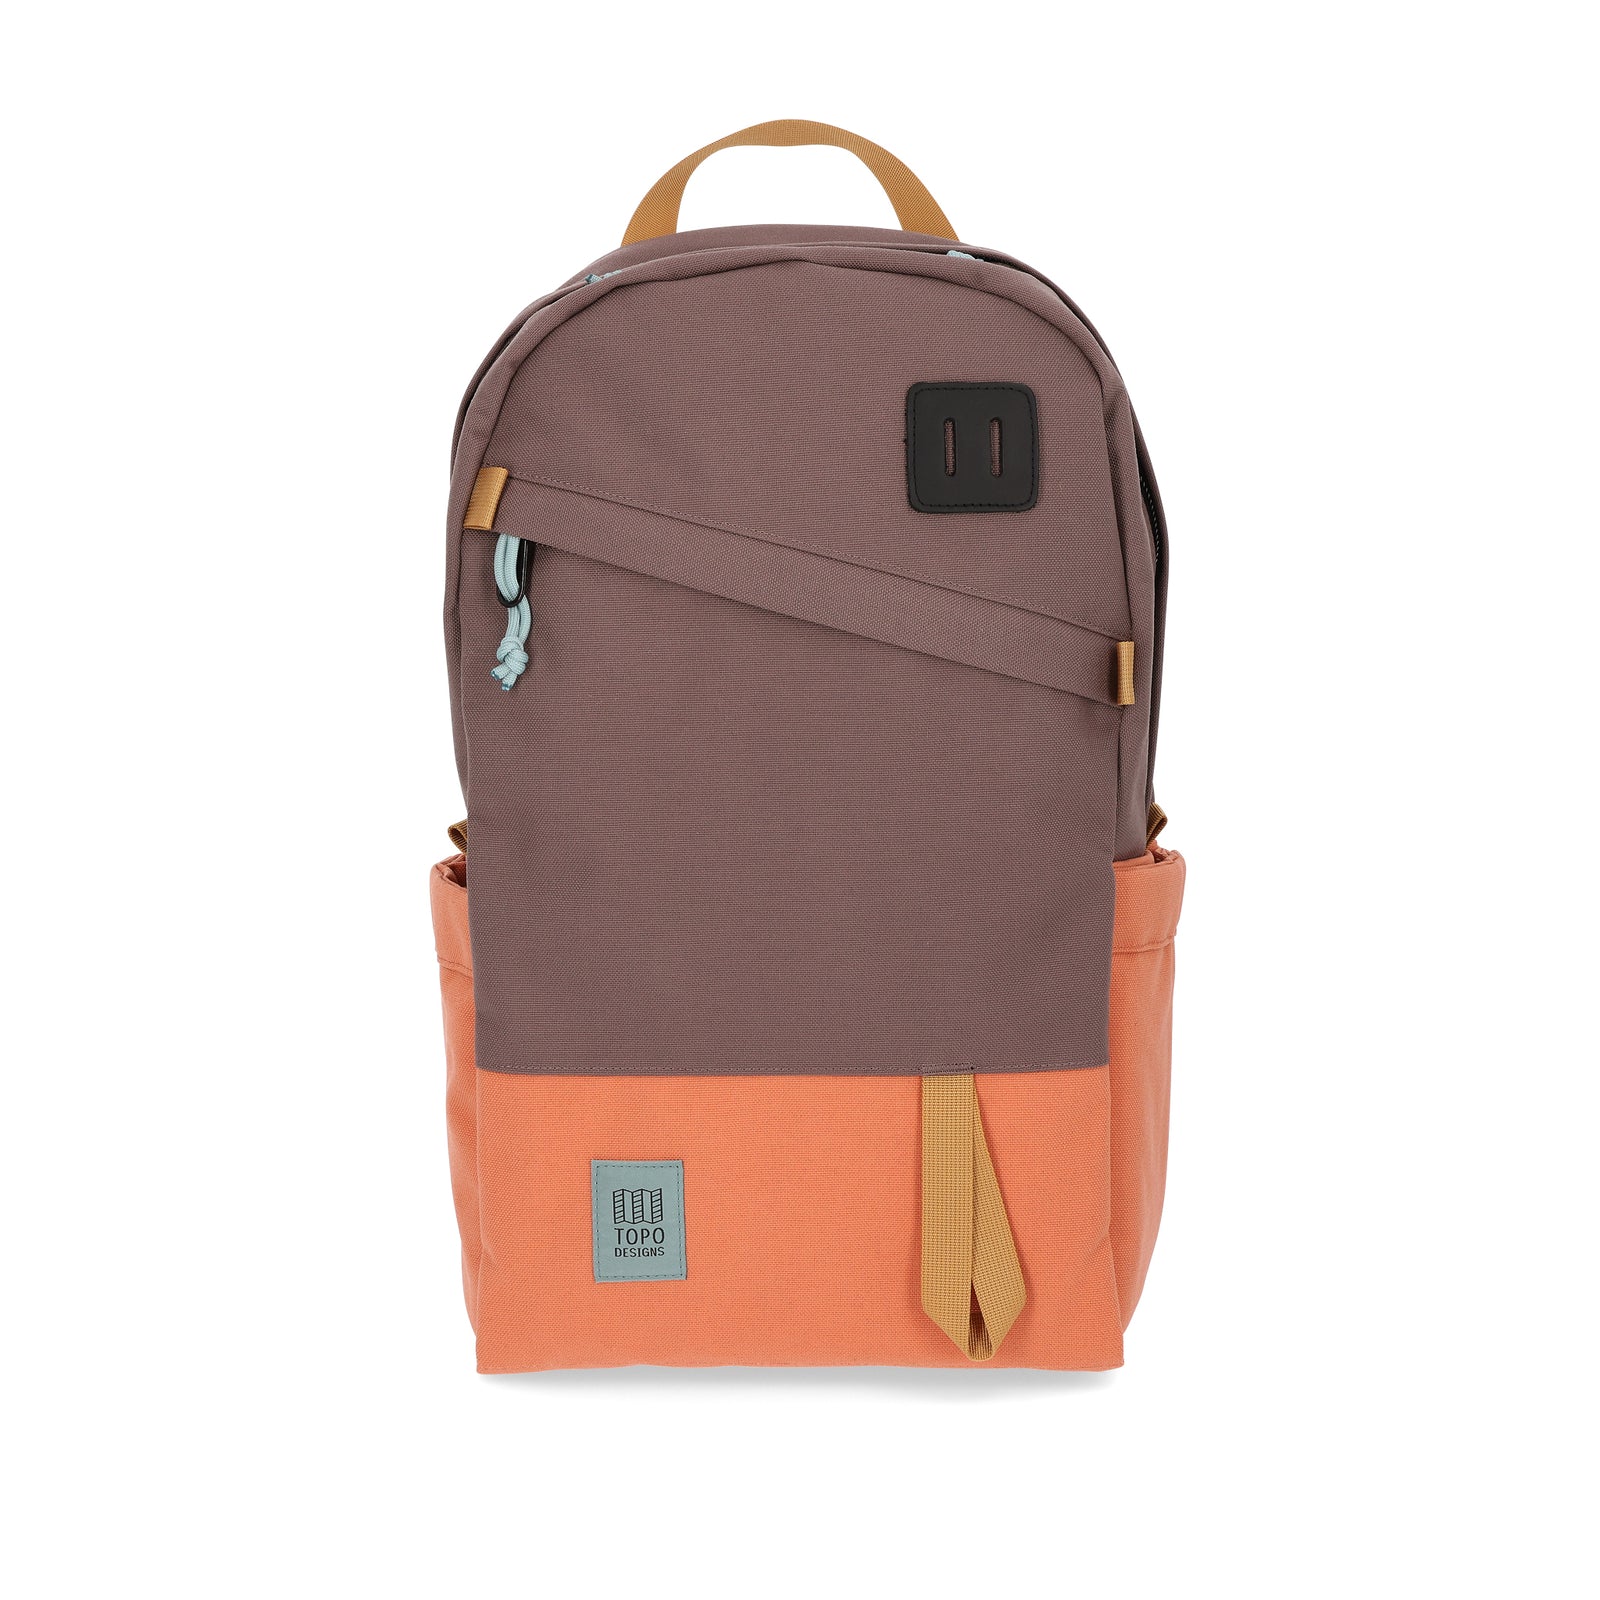 Topo Designs Daypack Classic 100% recycled nylon laptop backpack for work or school in "Coral / Peppercorn"